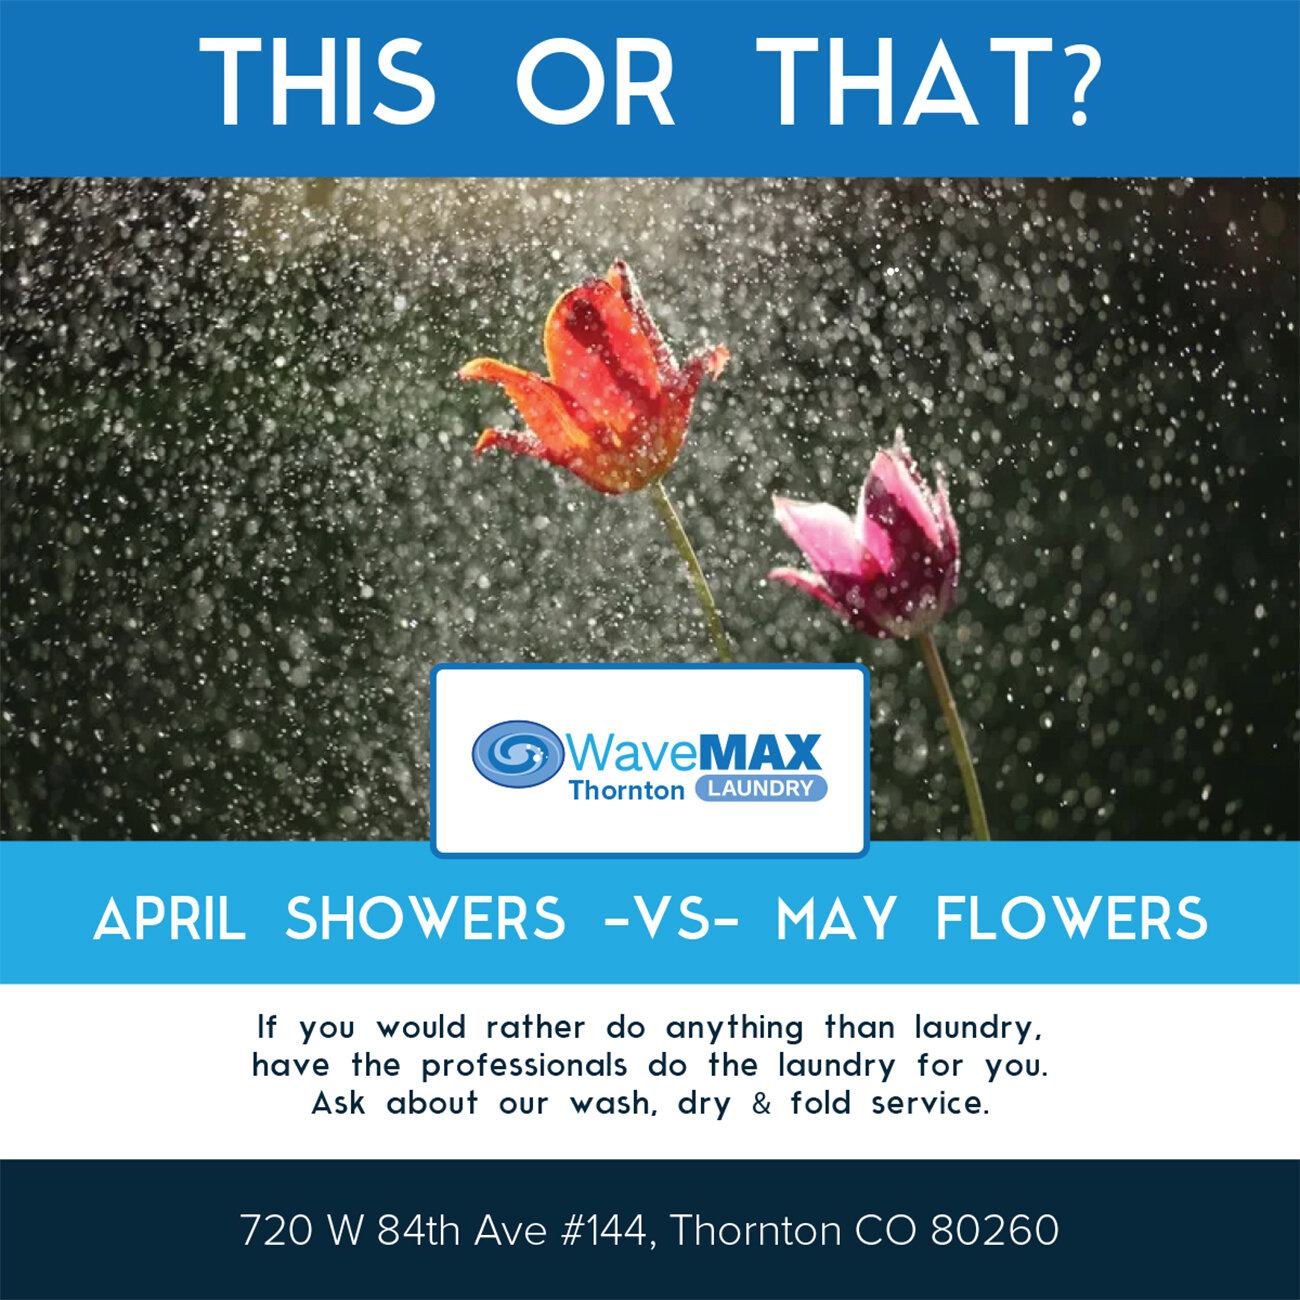 We are about half way through the showers and are really ready for the May flowers. How about you?  Like anything better than doing laundry? Ask about our wash, dry, &amp; fold service  For $1.69/lb. ($15 minimum) we wash, dry and fold your clothes. 